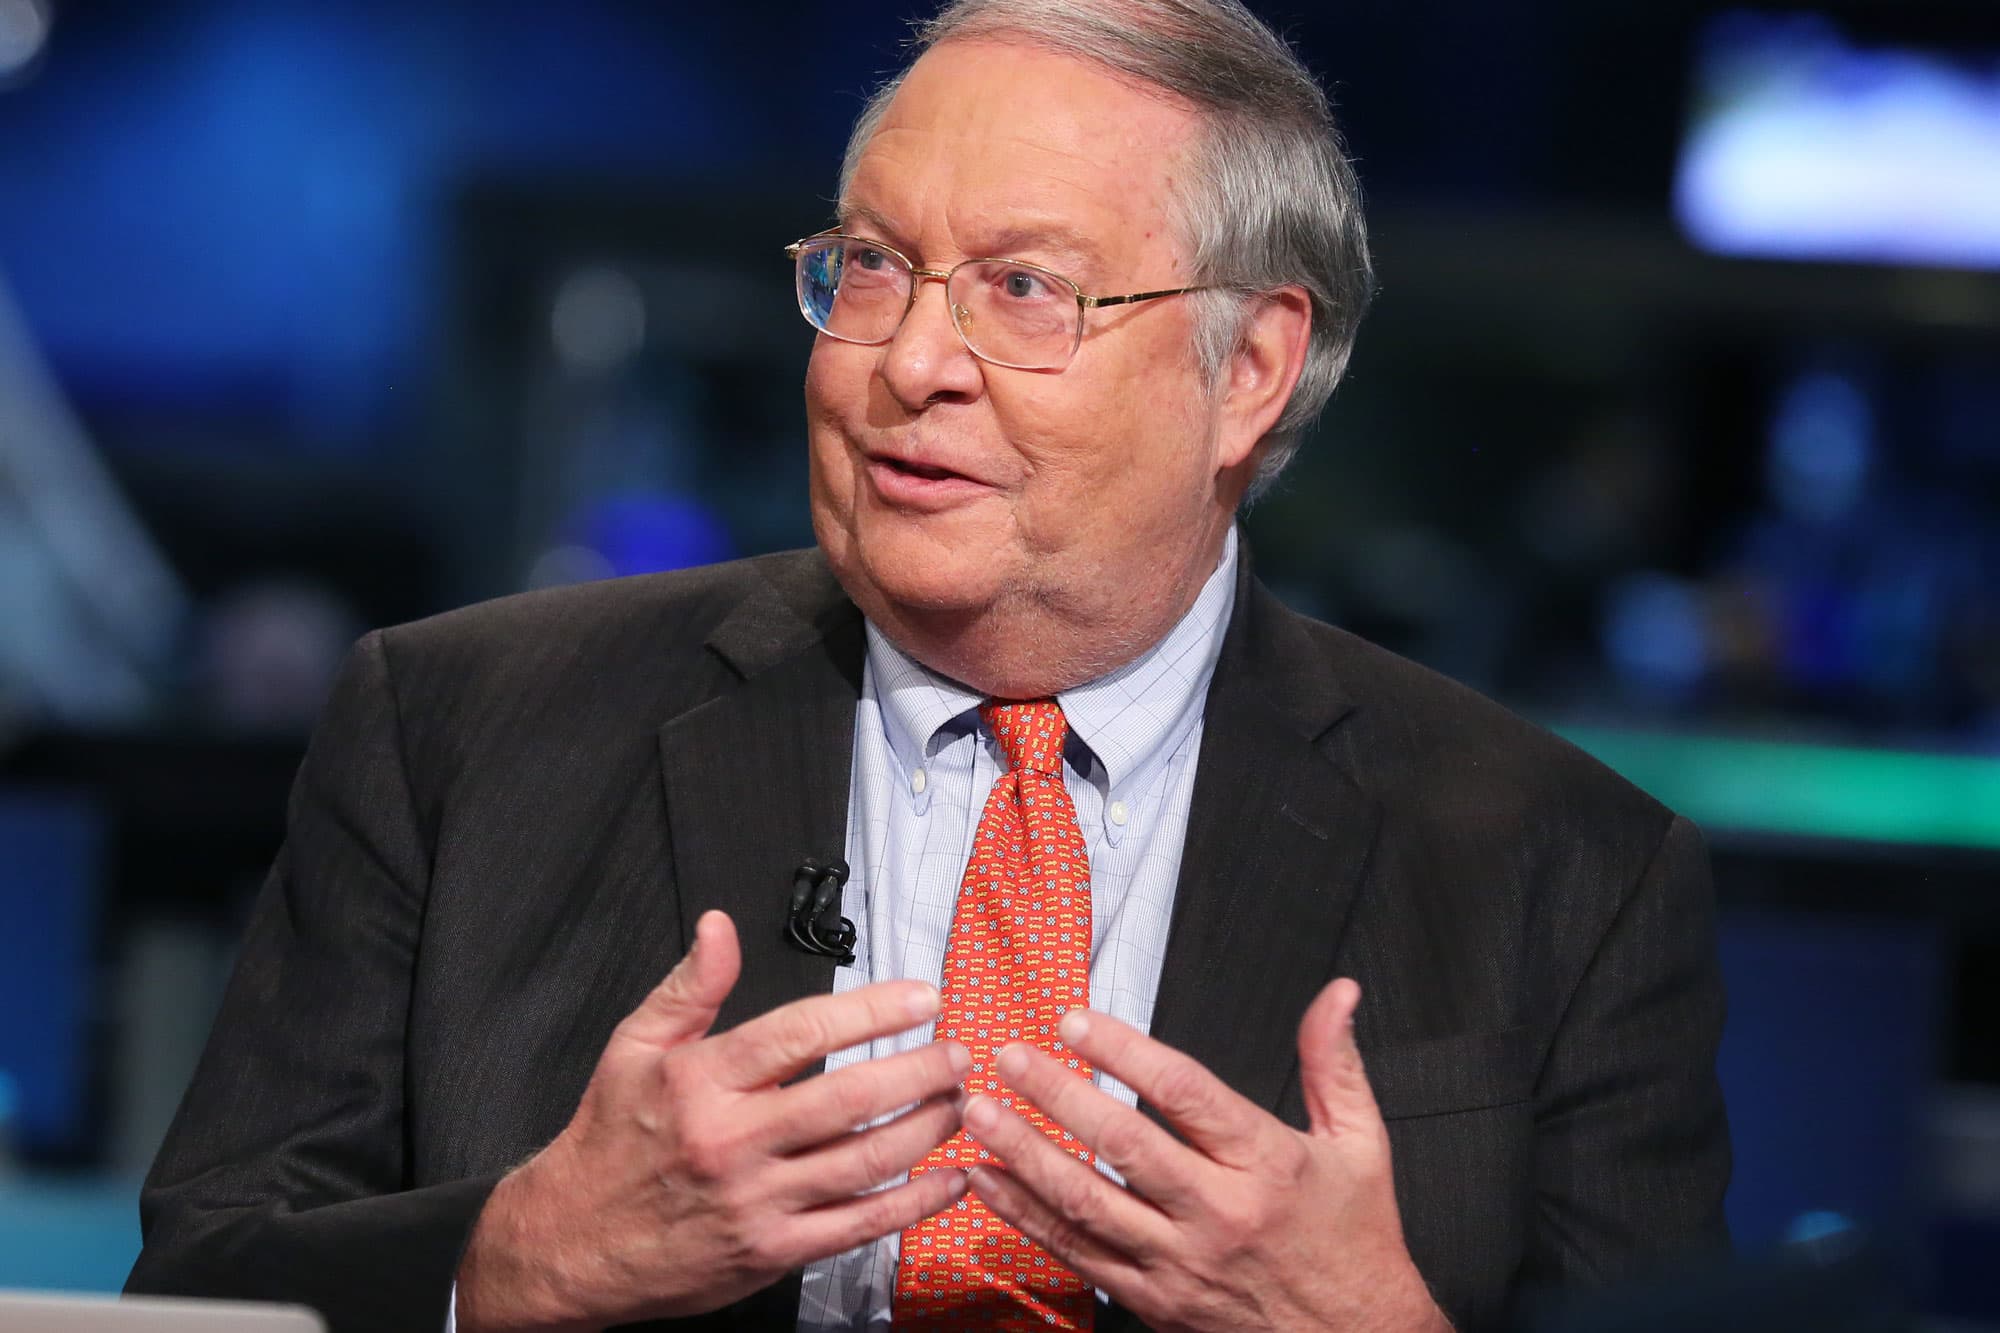 Investor Bill Miller aims to top the S&P 500 consistently once again, but this time with new ETFs